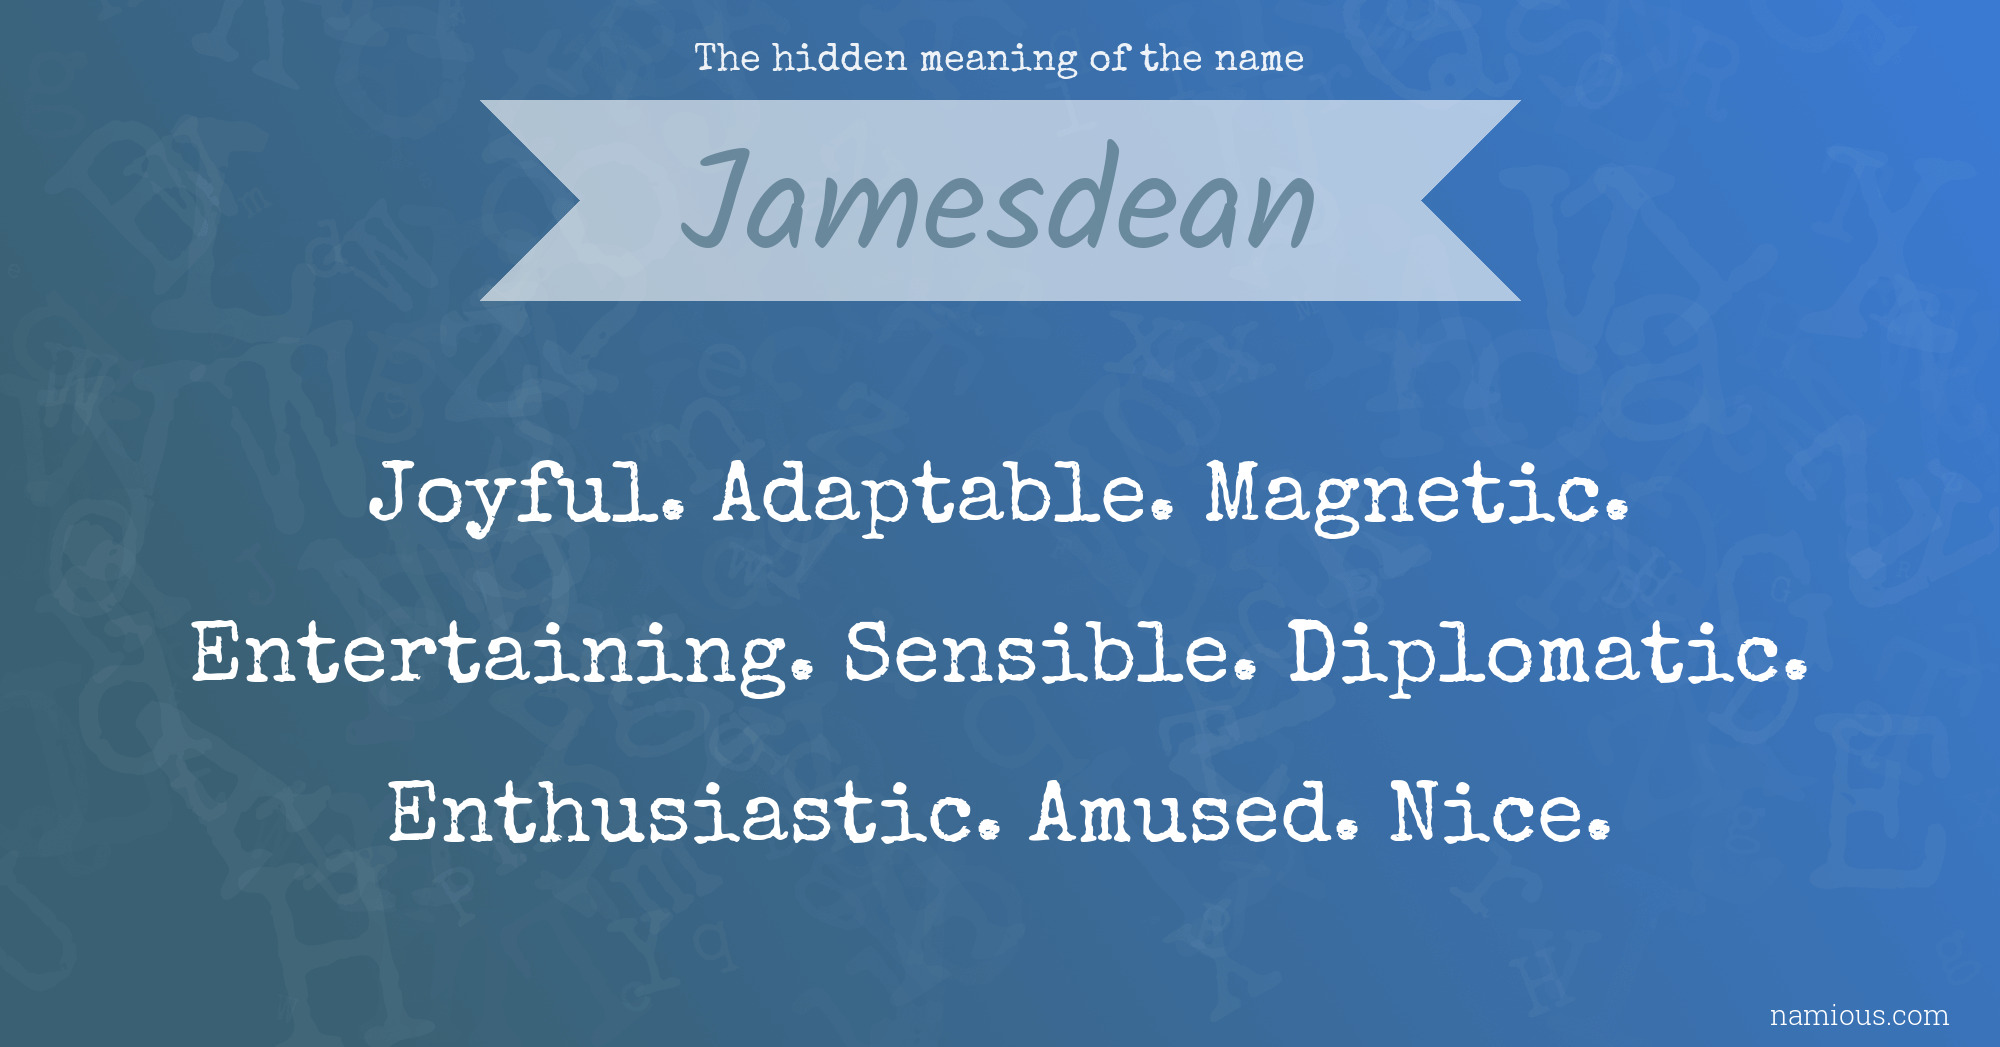 The hidden meaning of the name Jamesdean